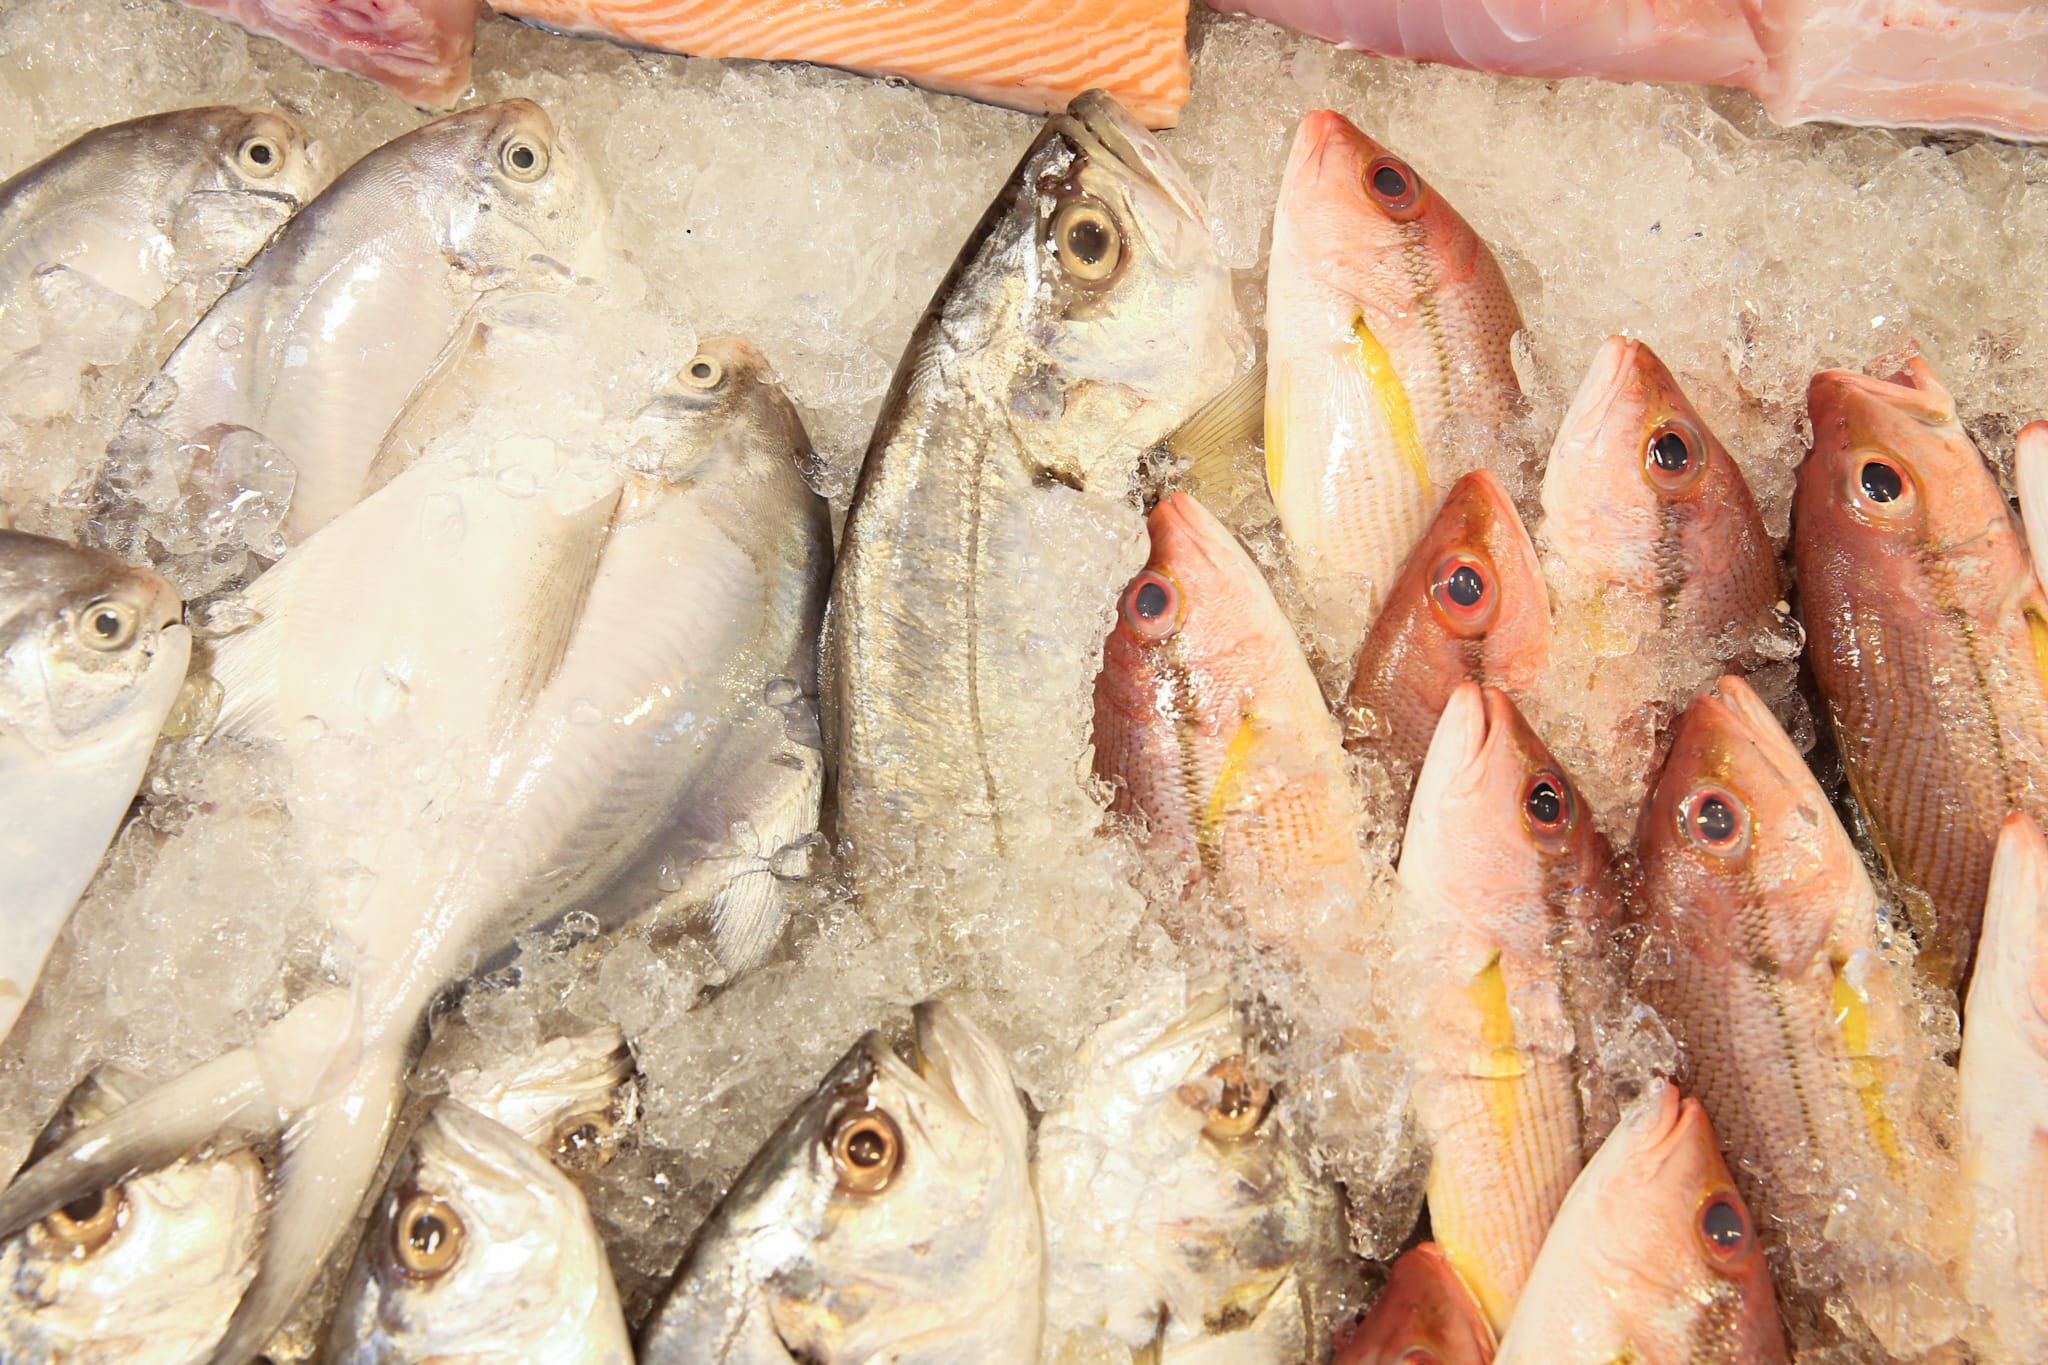 The authors noted that seafood mishandling is garnering more attention due to its potential to negatively impact consumer health.